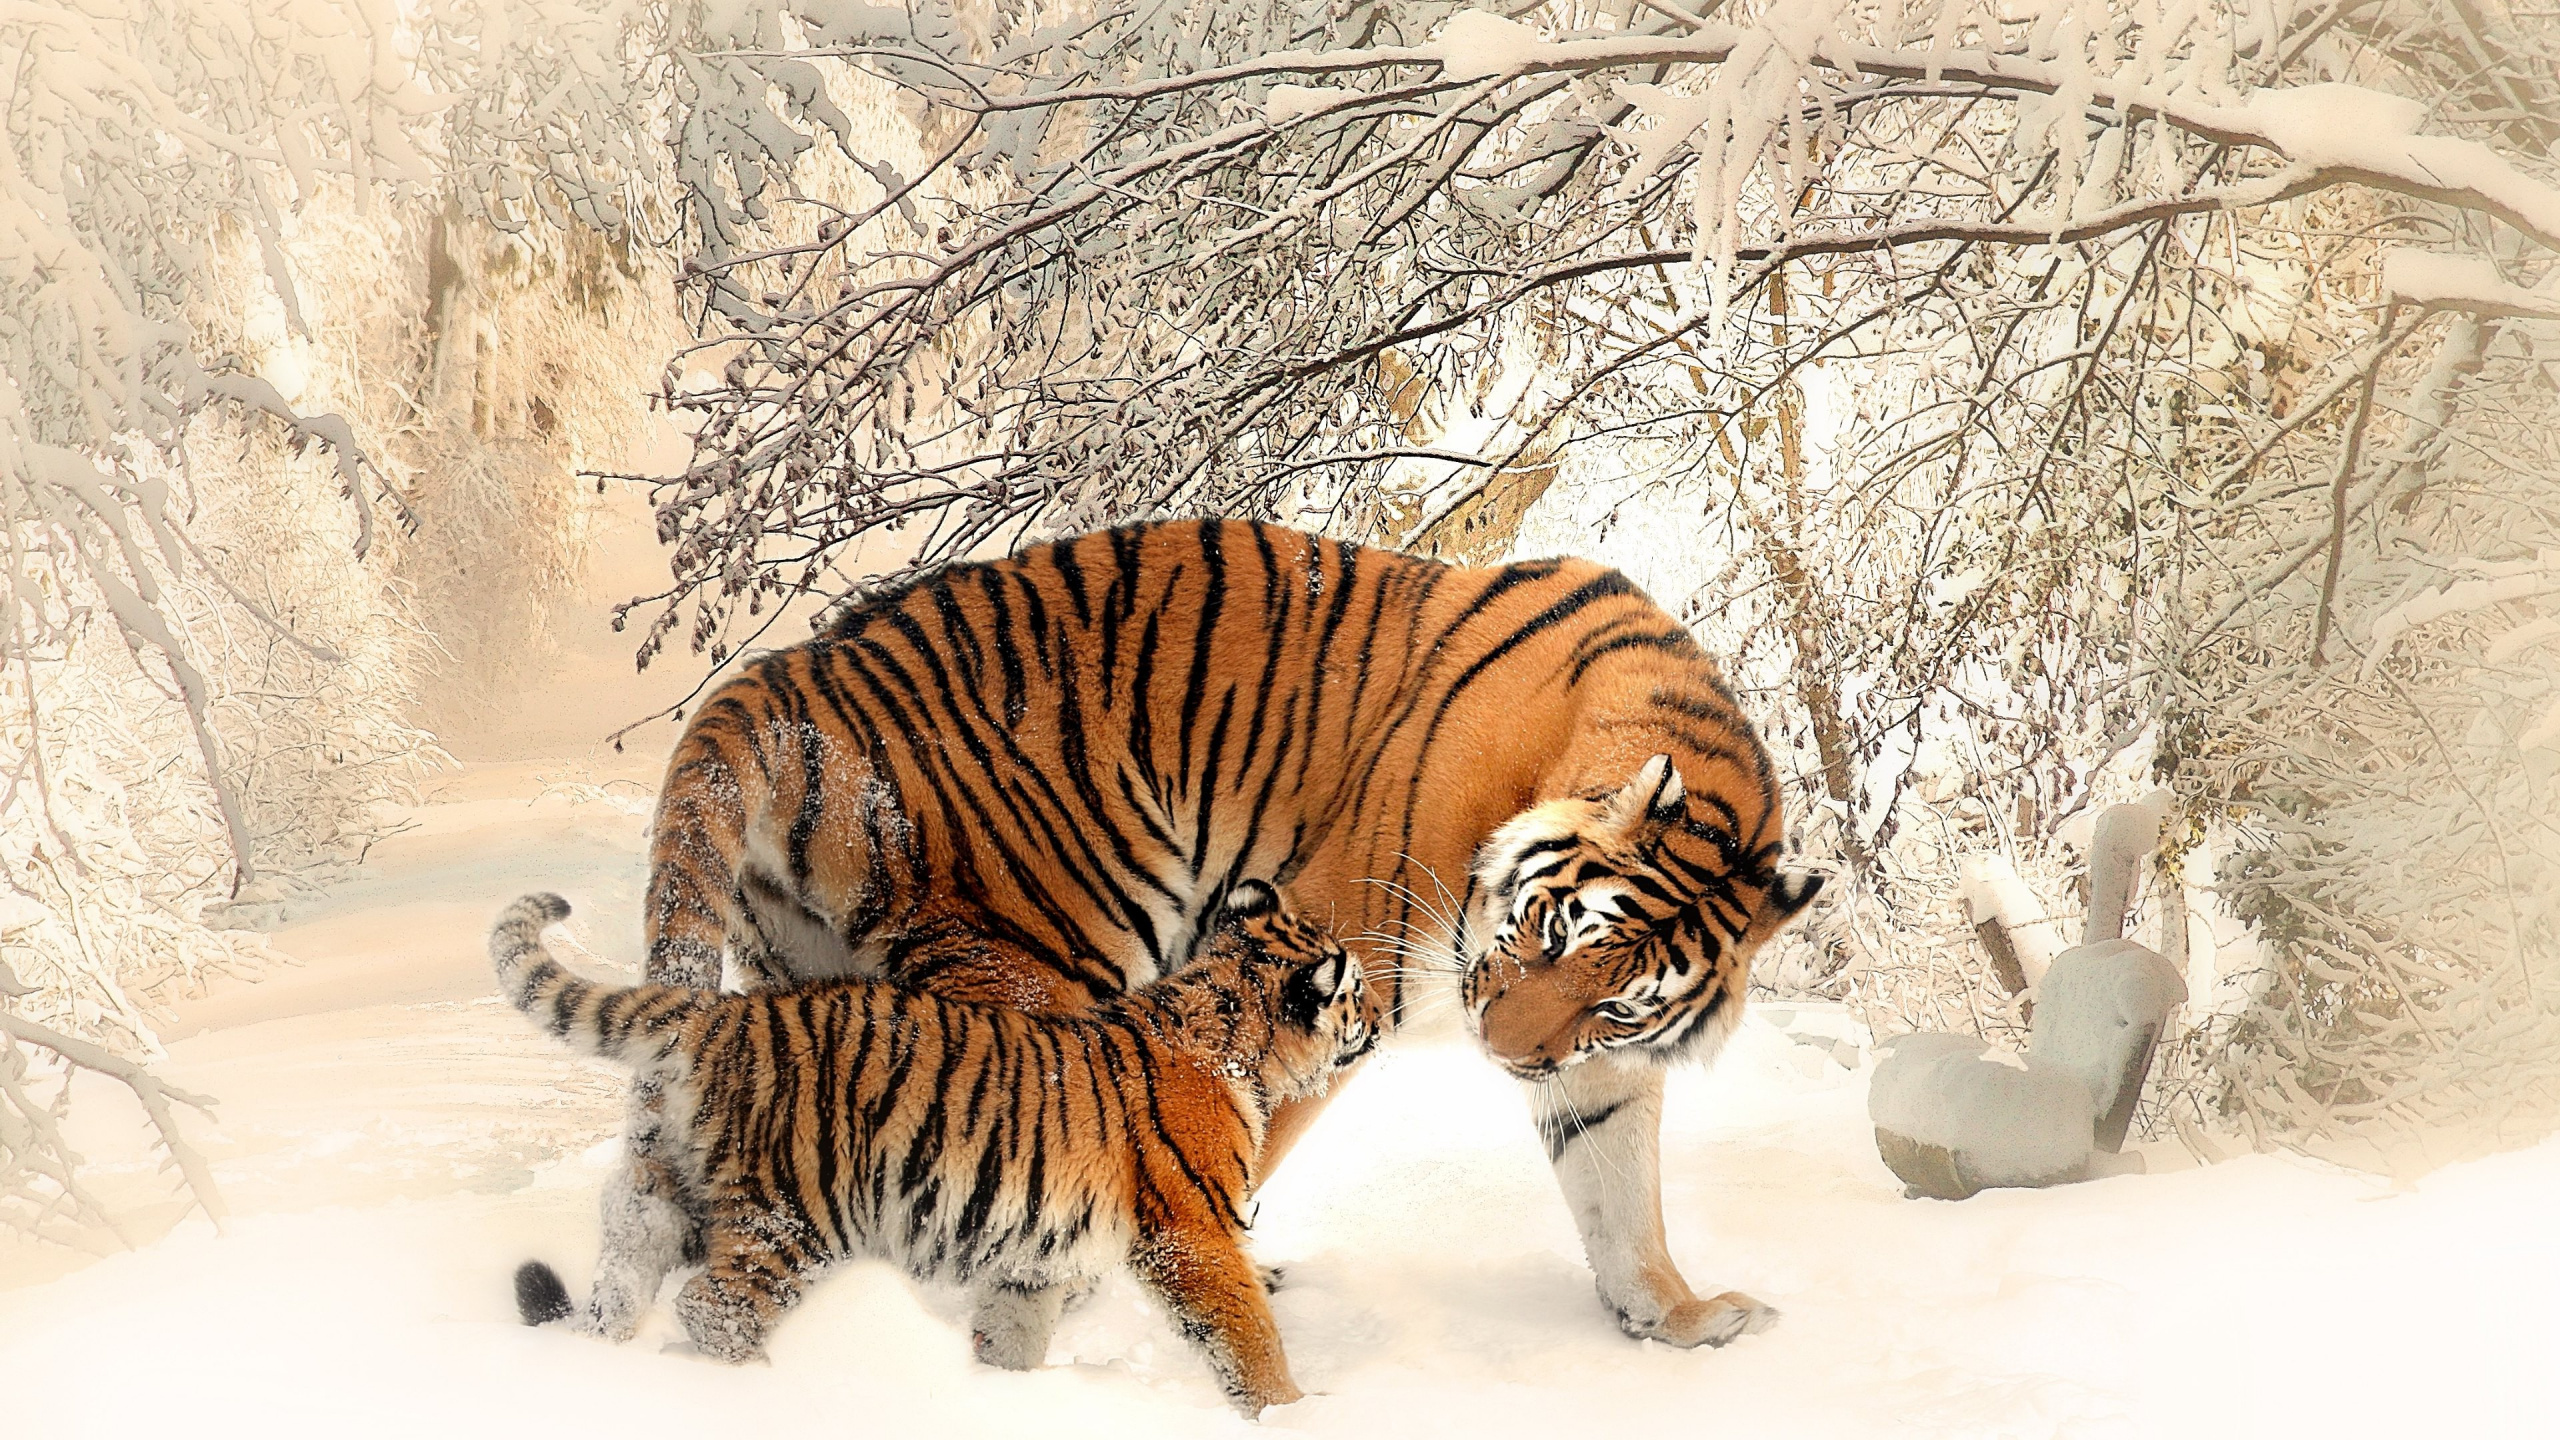 Tiger Walking on Snow Covered Ground During Daytime. Wallpaper in 2560x1440 Resolution